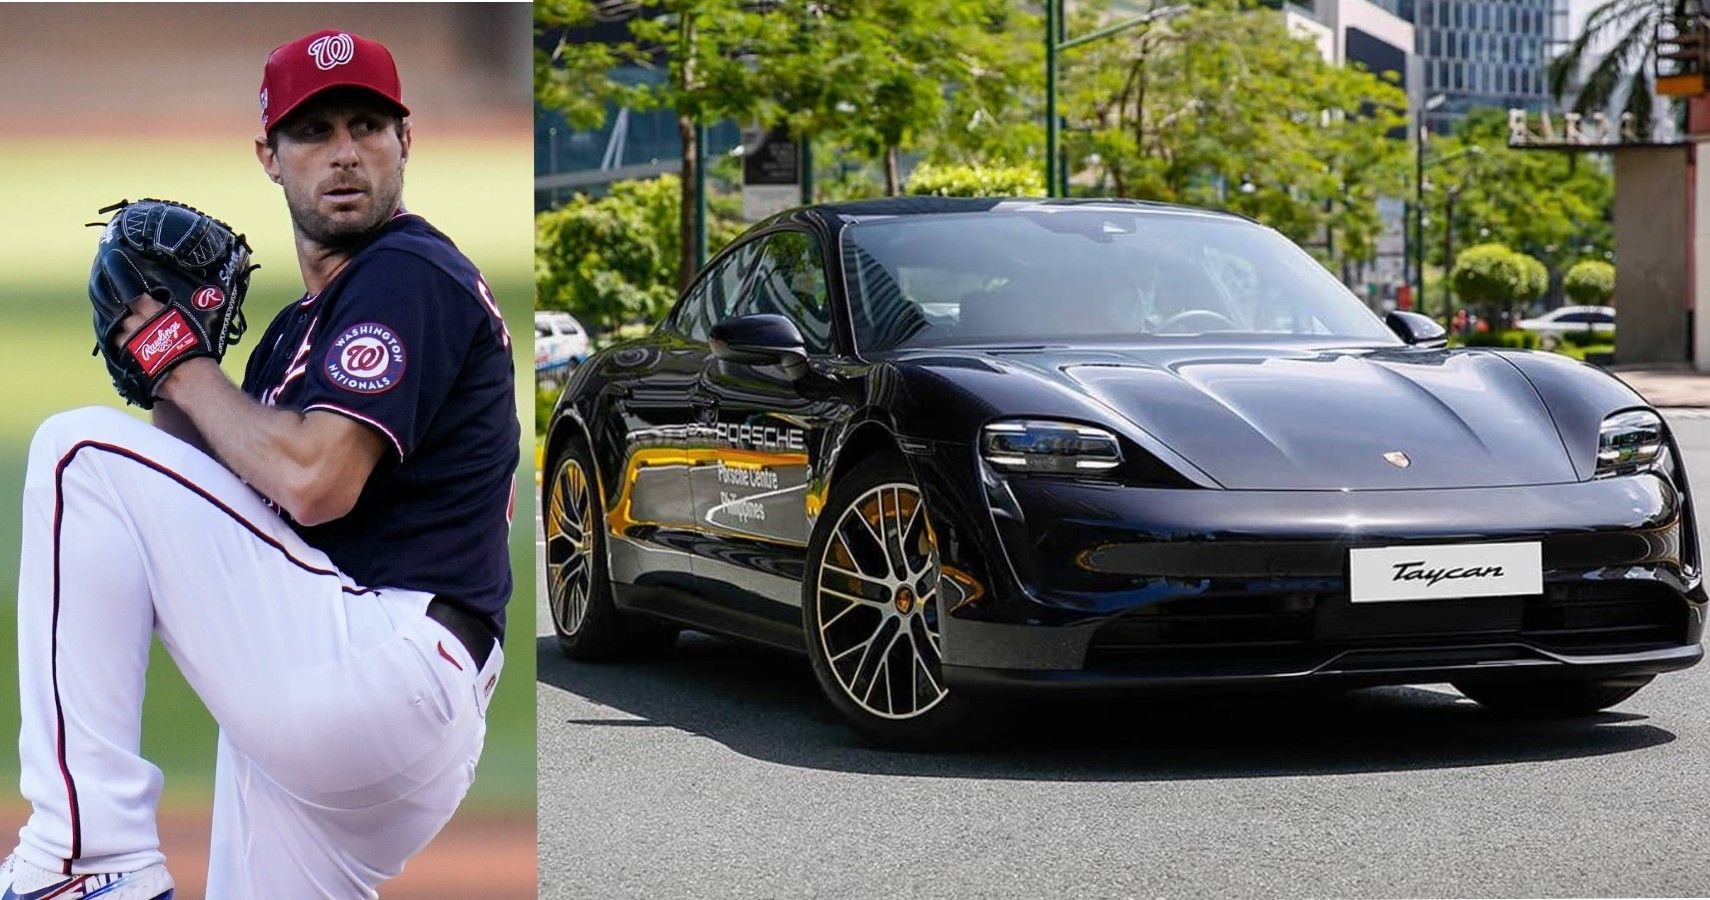 10 MLB Players And Their Favorite Cars